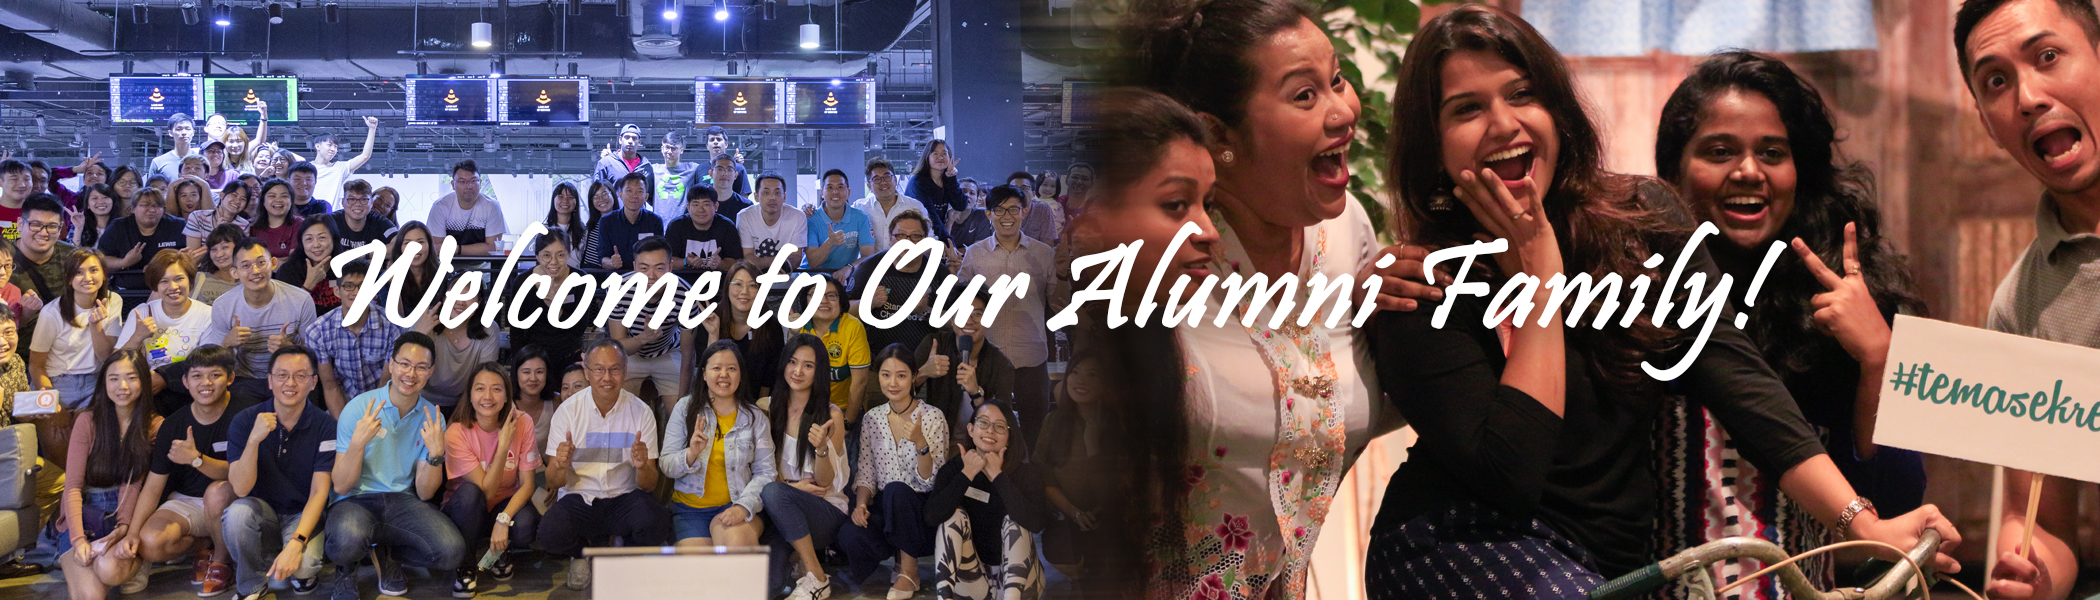 Welcome to our alumni family!